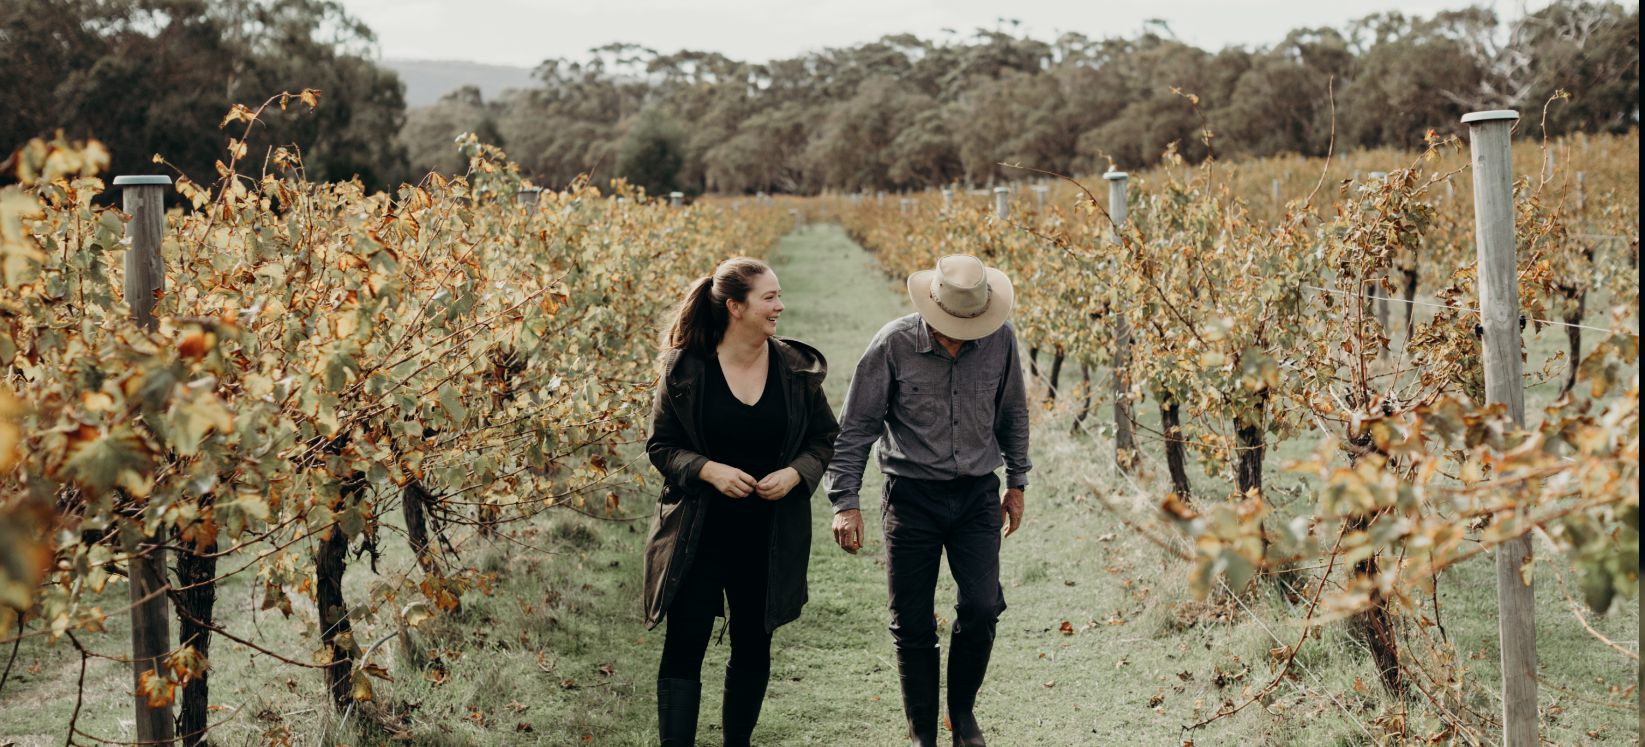 Woman and man walking together in the vineyard 